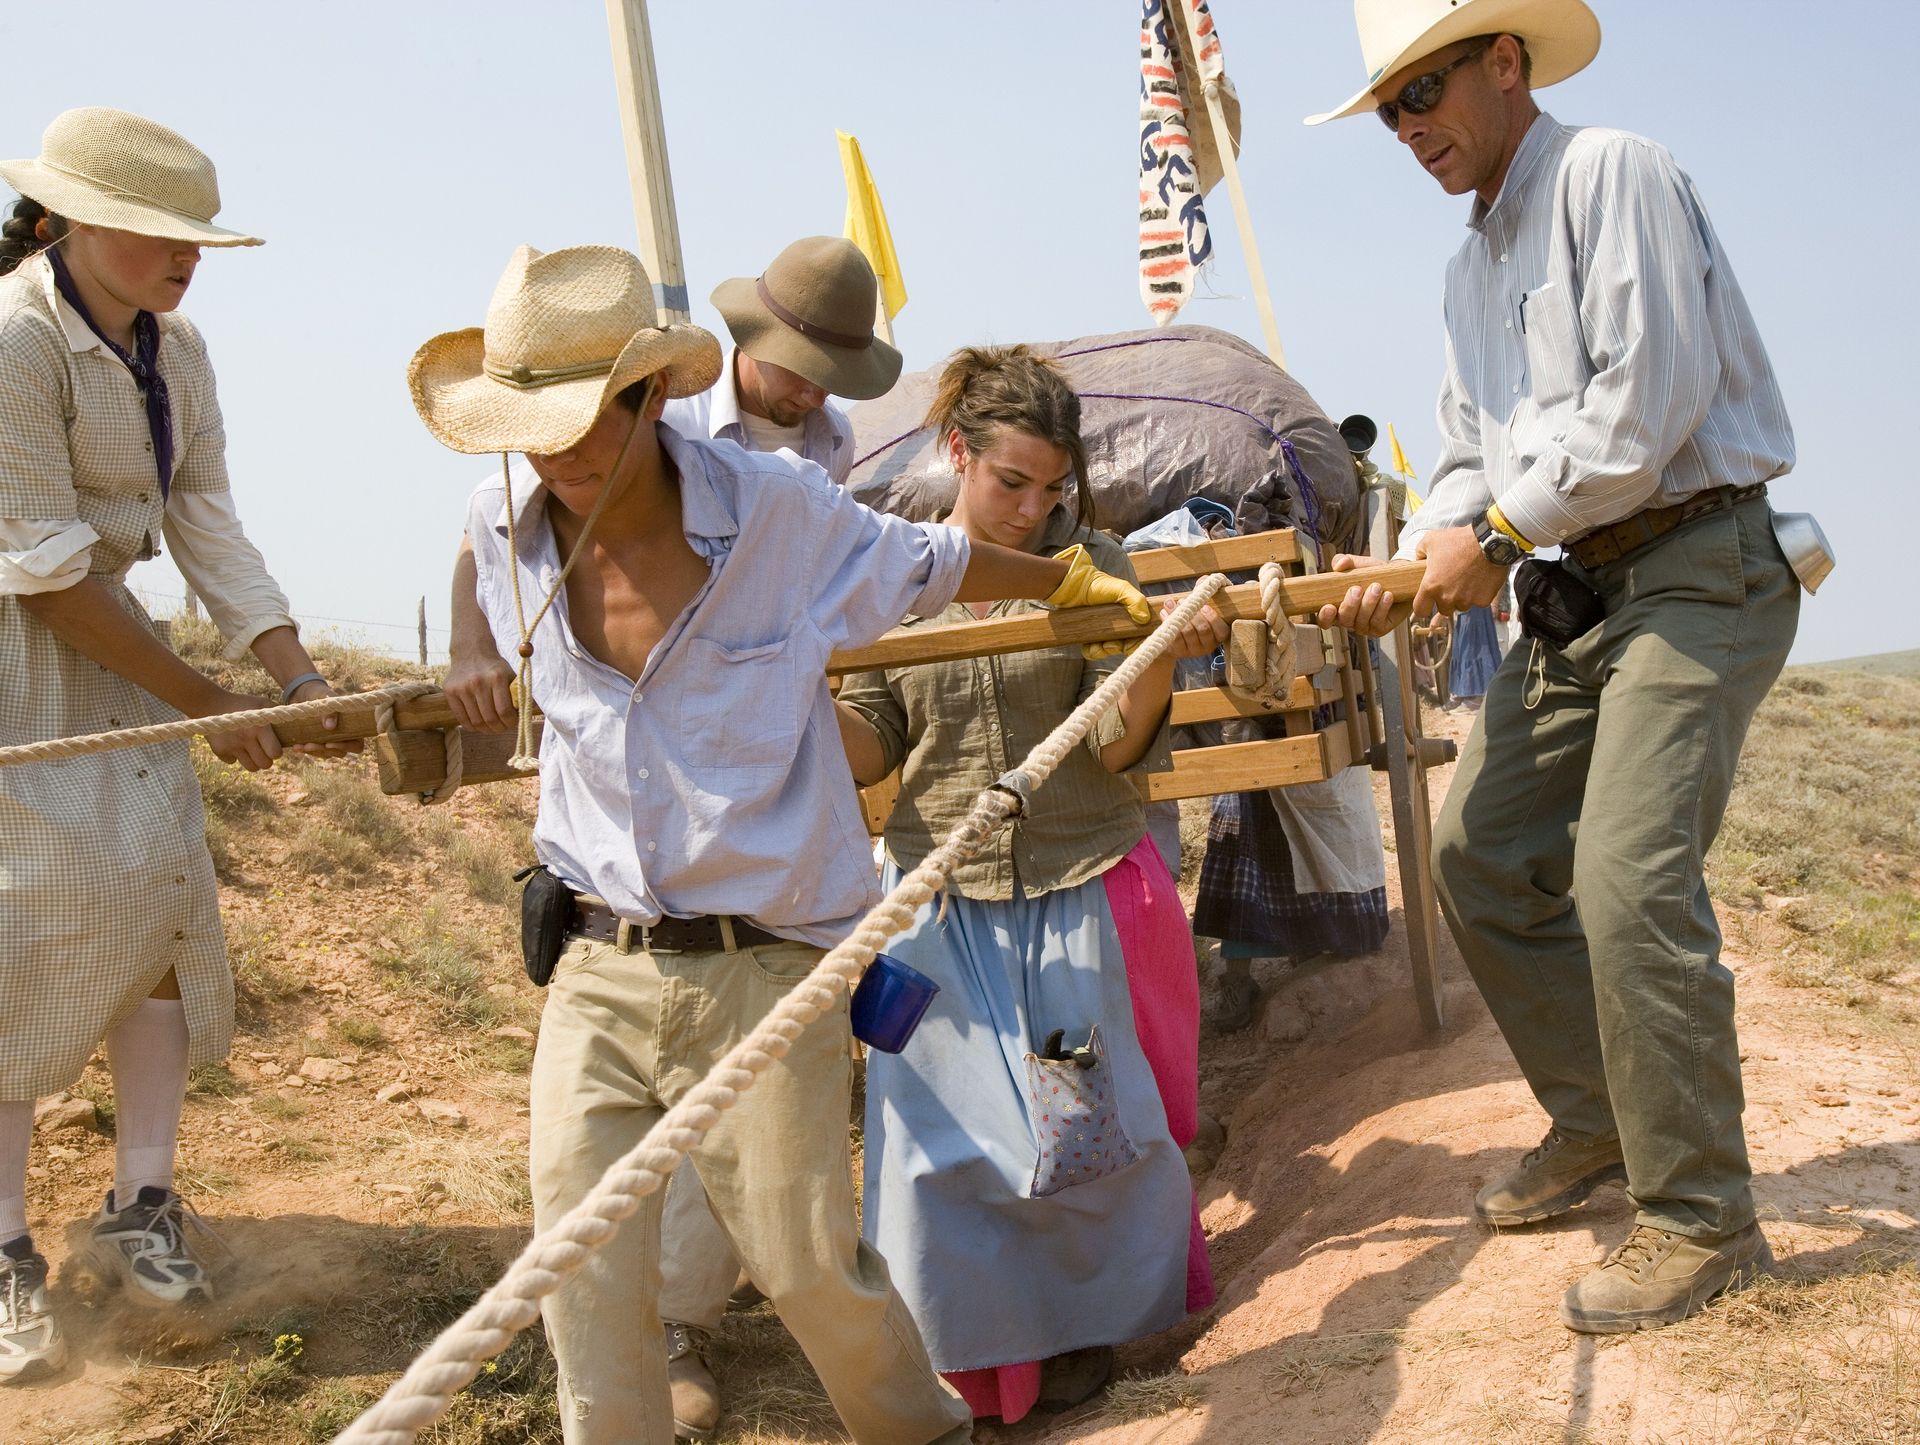 Two young men and one young woman pull a handcart carefully over a rocky and jagged path.